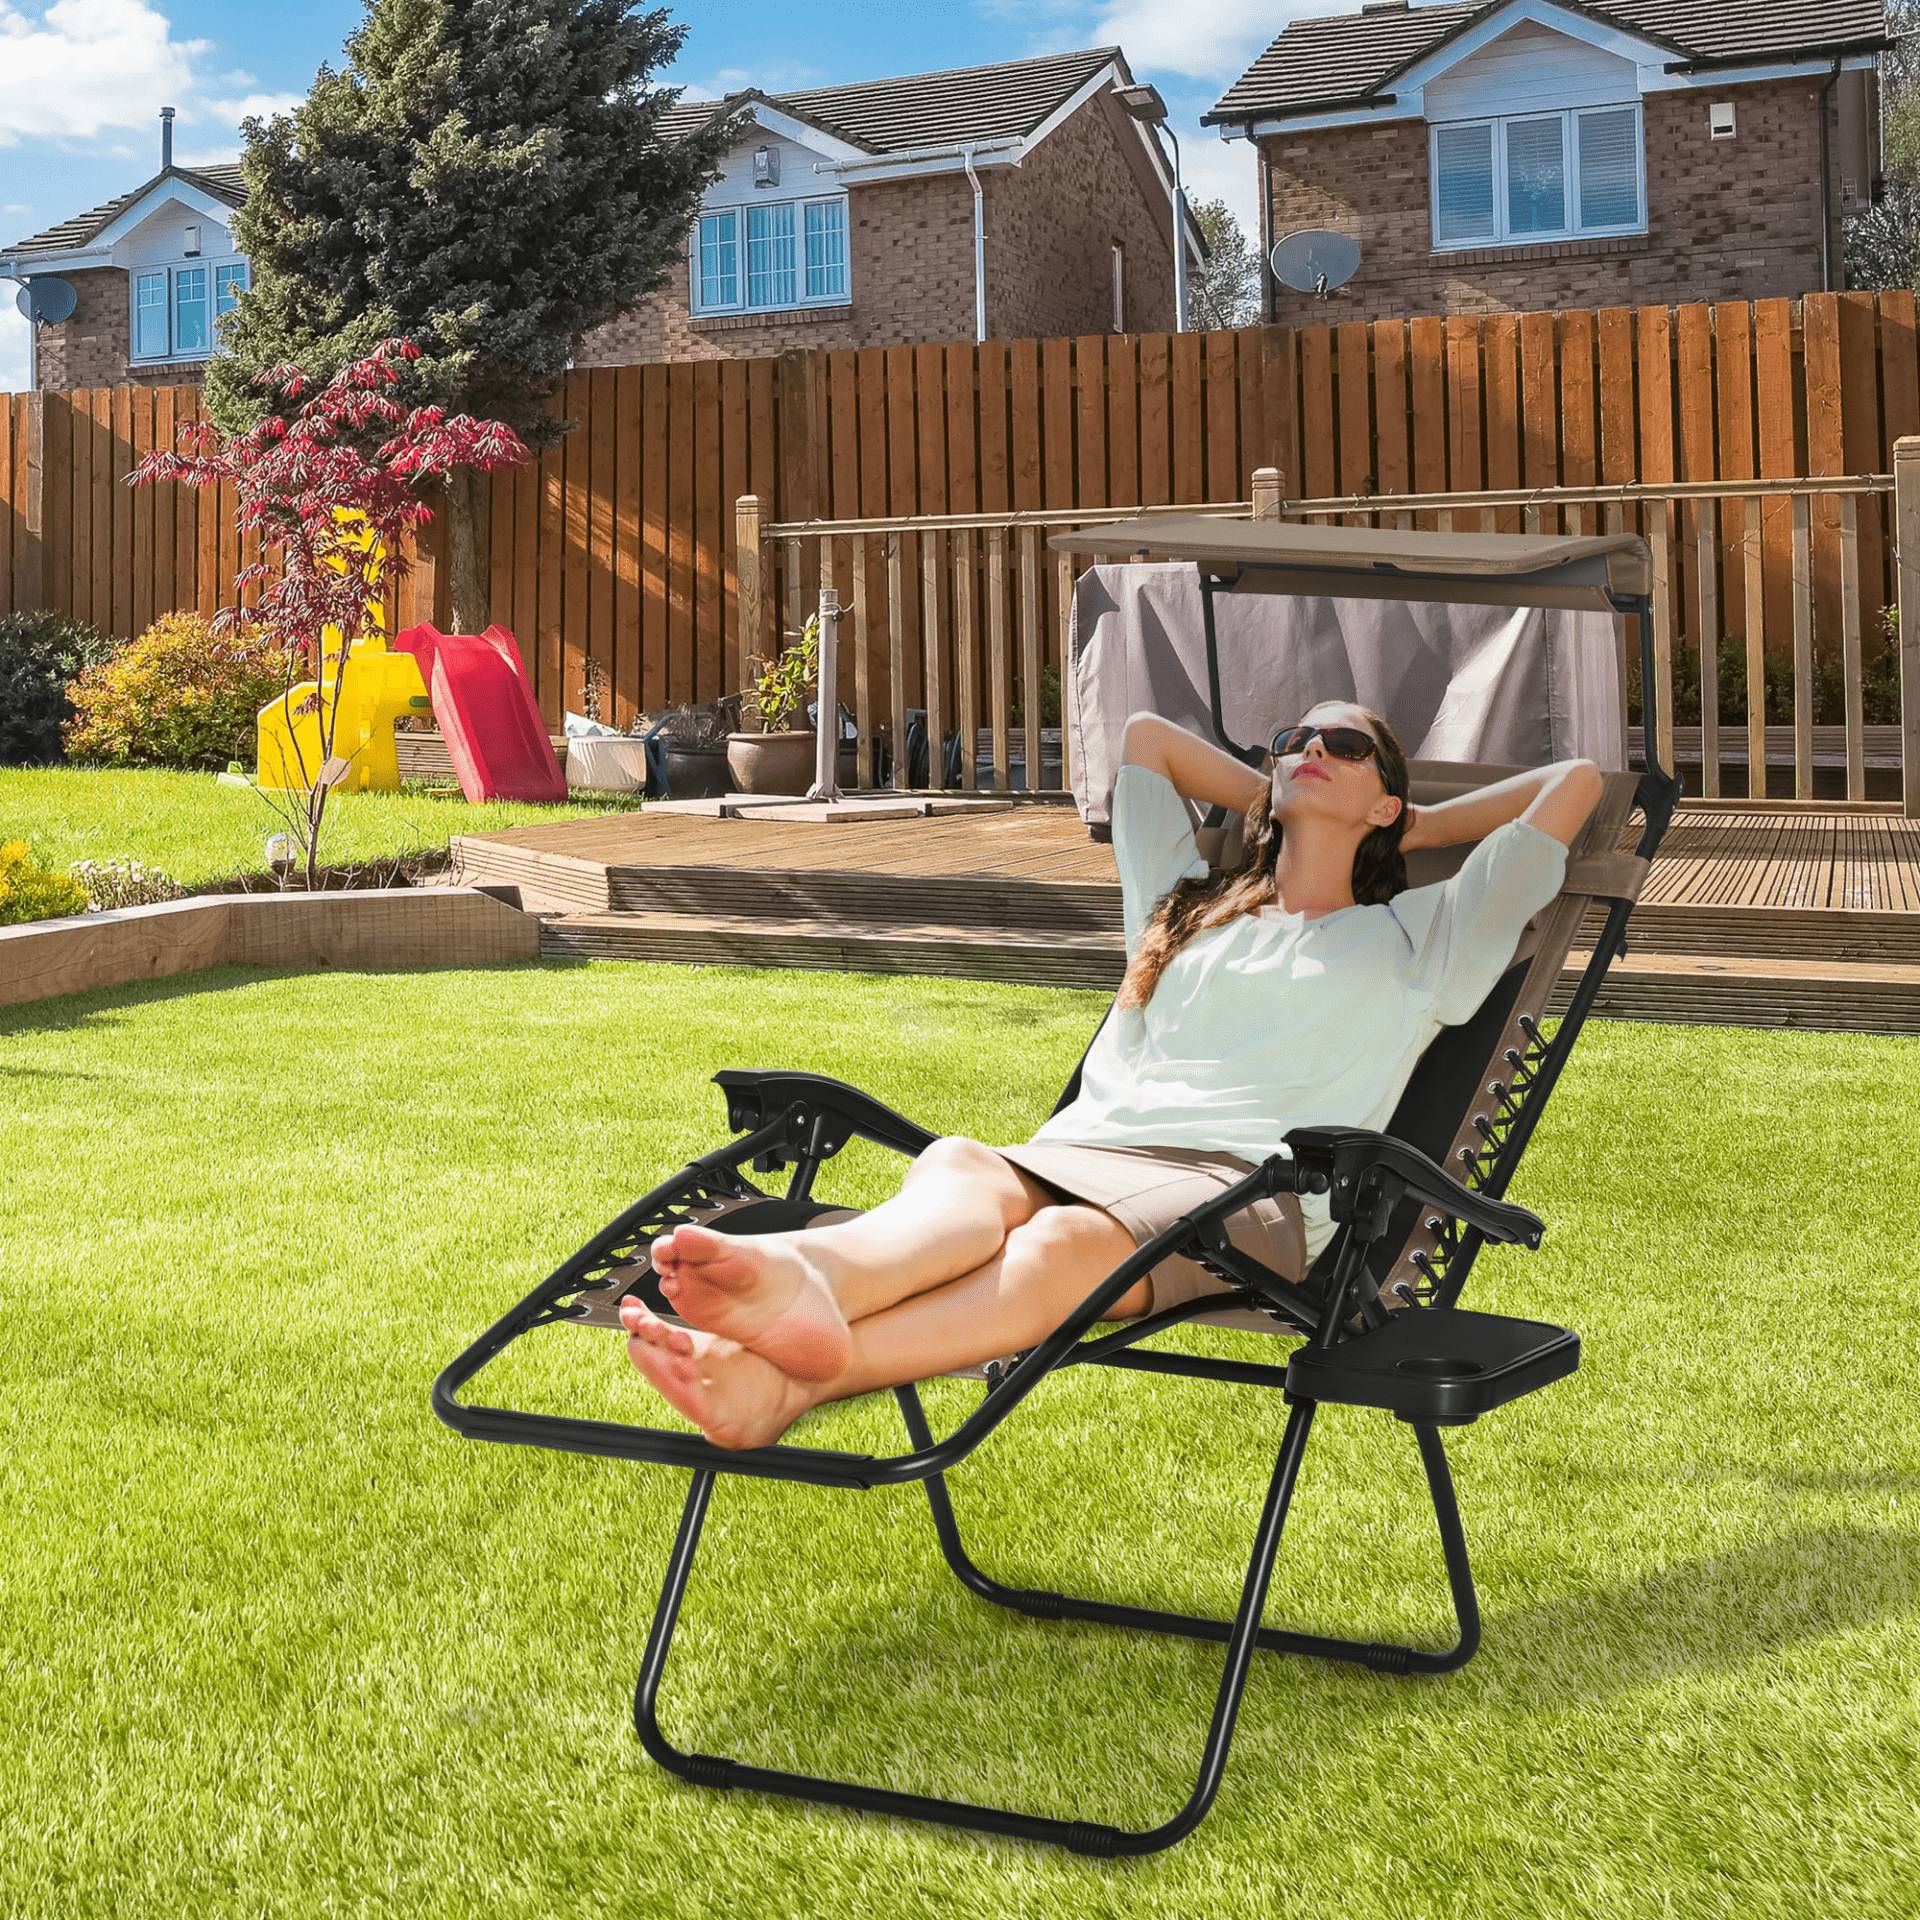 Outsunny Zero Gravity Lounger Chair, Folding Reclining Patio Chair with Shade Cover, Cup Holder, Soft Cushion and Headrest - Brown Camping Chair Cosy Camping Co.   